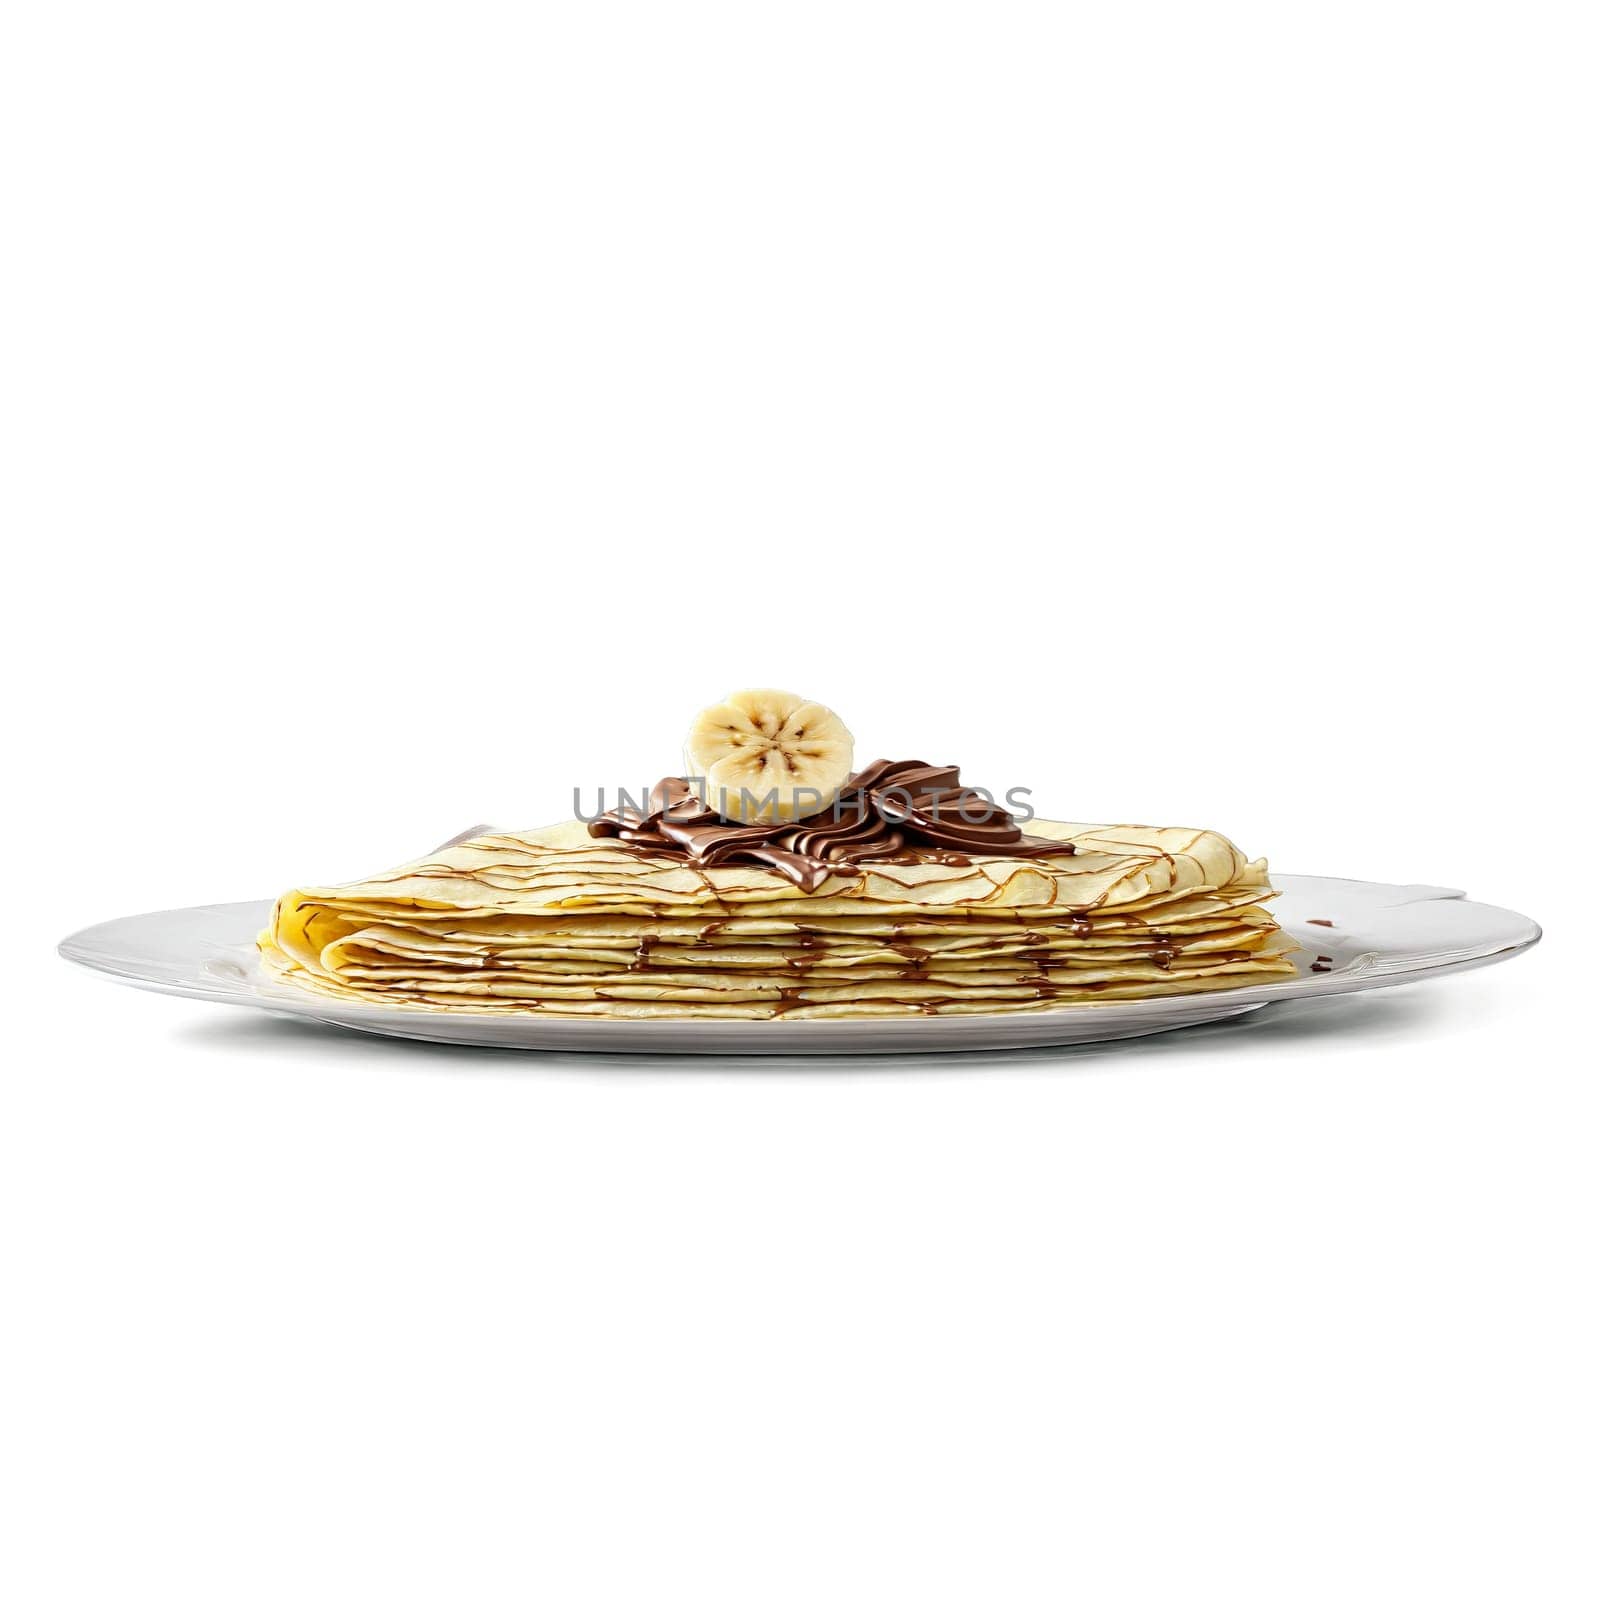 Crepes with nutella and banana slices folded and spinning Food and culinary concept. Food isolated on transparent background.